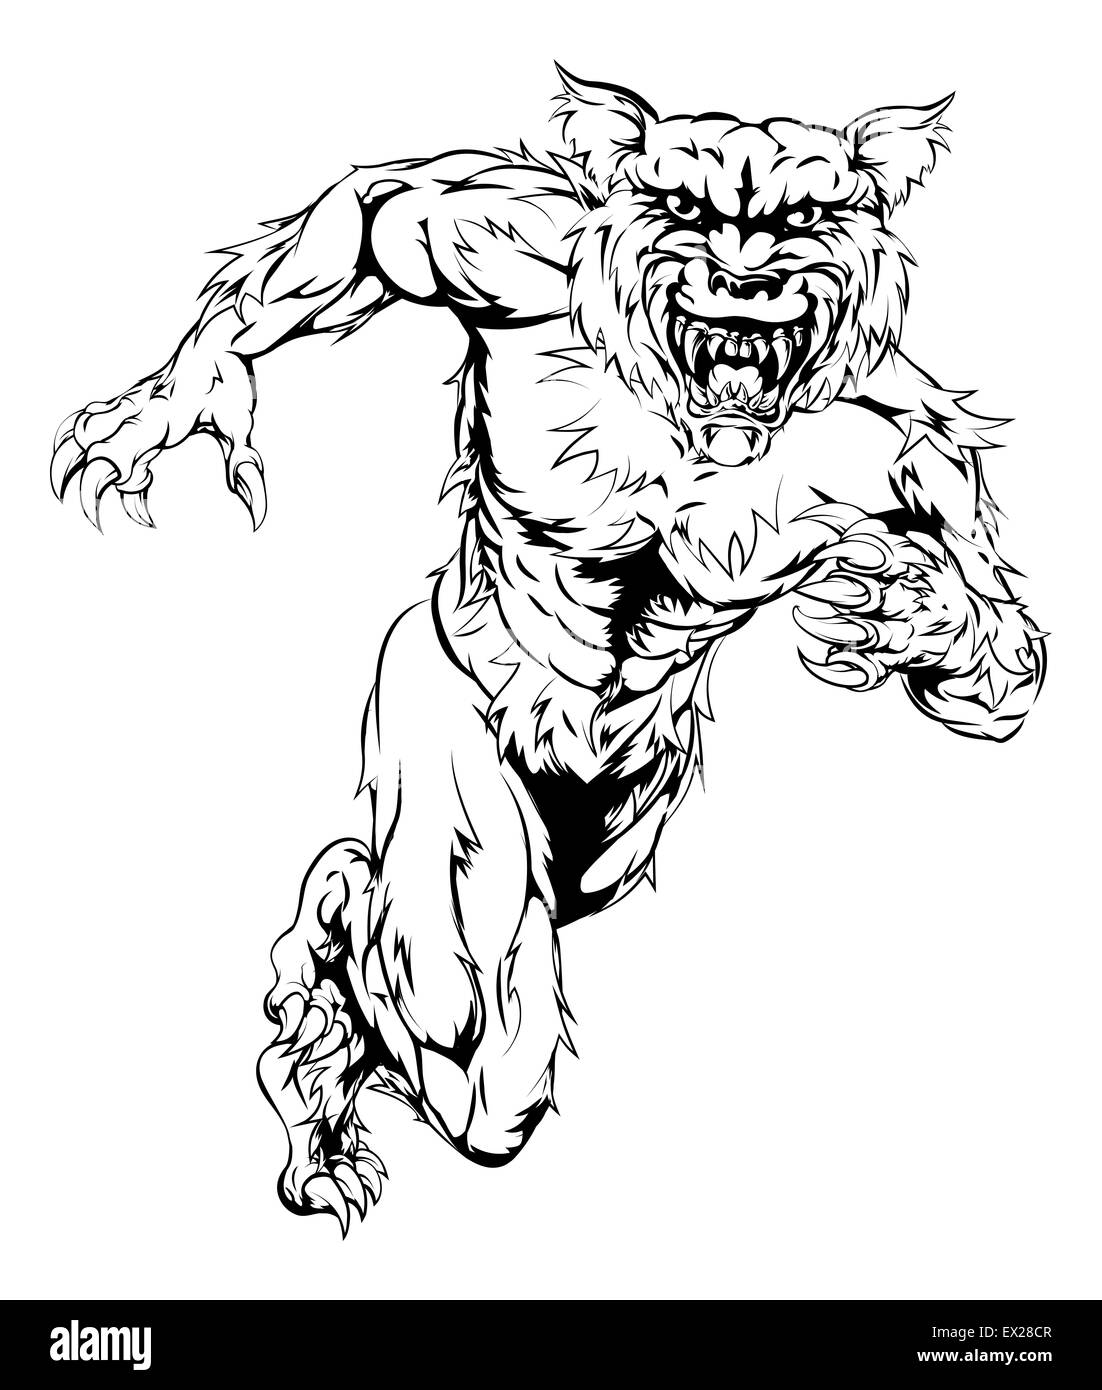 A werewolf wolf man character or sports mascot charging, sprinting or ...